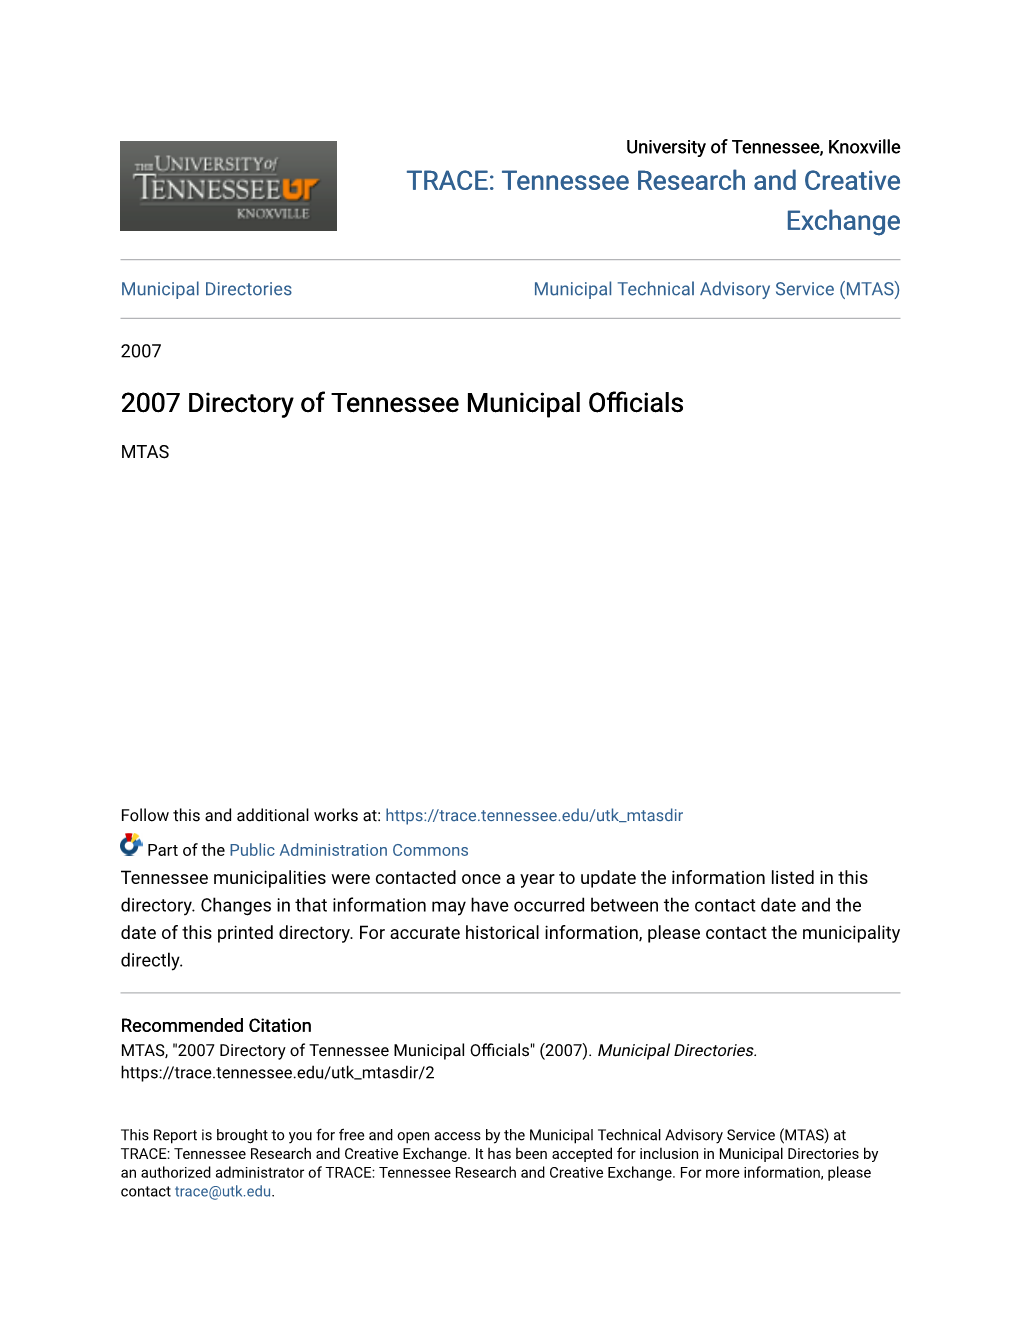 2007 Directory of Tennessee Municipal Officials